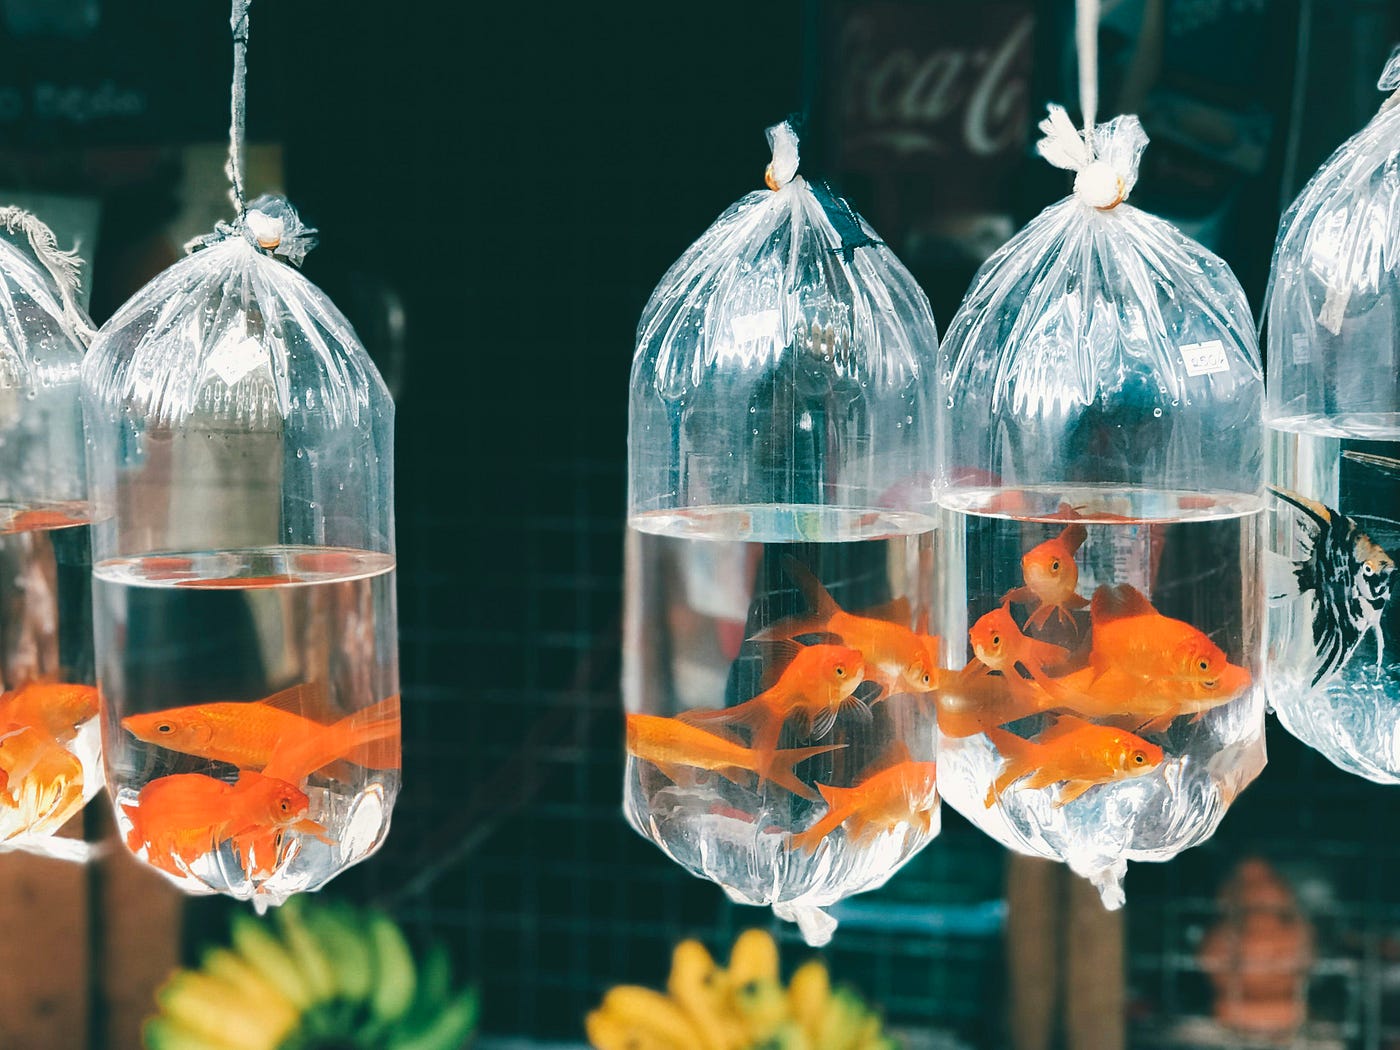 My Son Got A Goldfish As A Birthday Party Favor, by Adrienne Gibbs